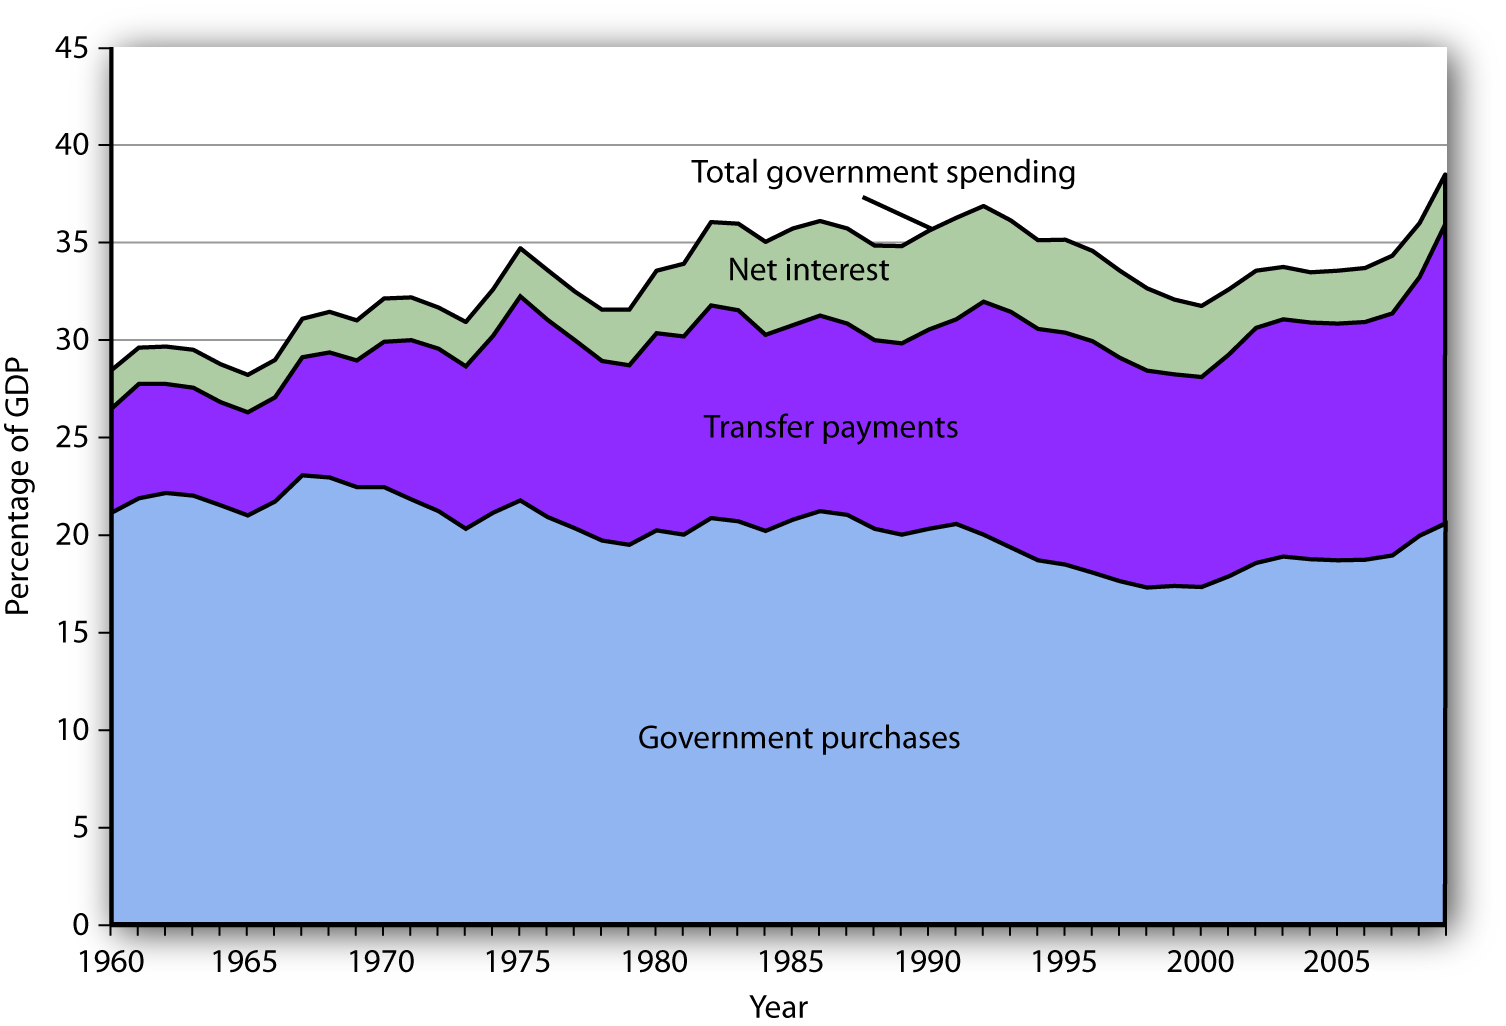 Government Spending as a Percentage of GDP. This chart shows three major categories of government spending as percentages of GDP: government purchases, transfer payments, and net interest.